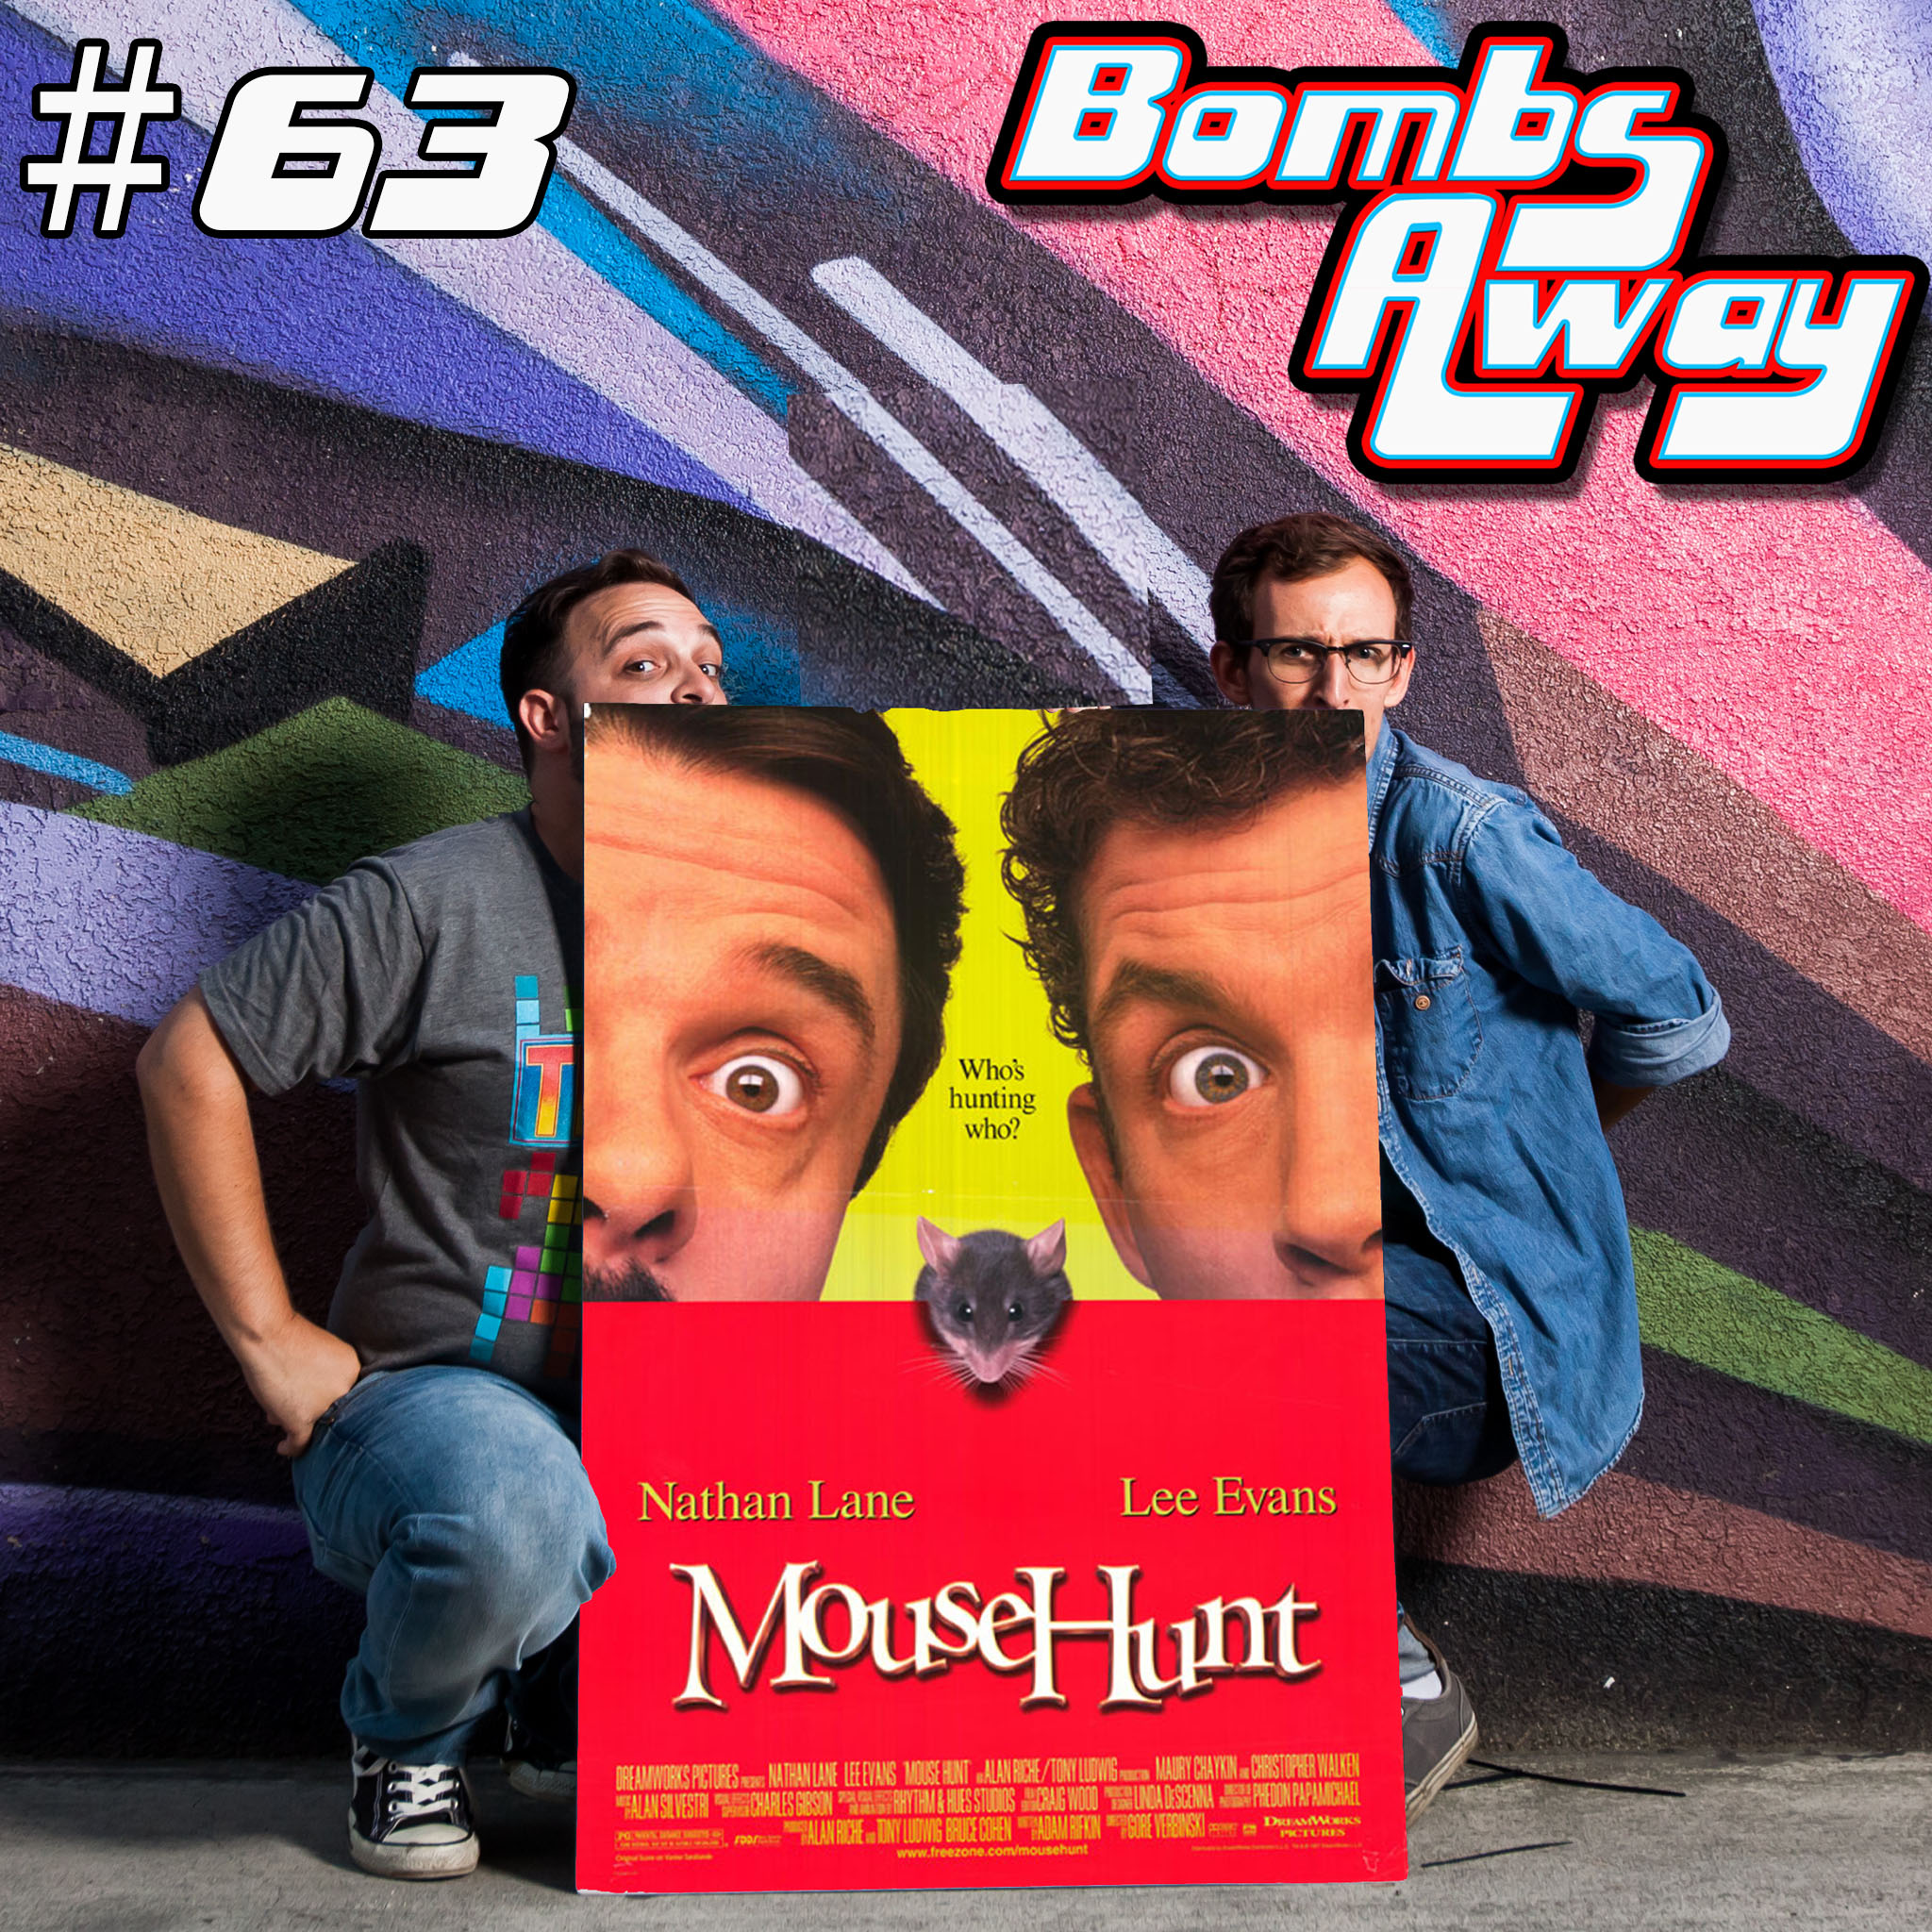 Episode 63 - Mousehunt (1997) [w/ Cheryl Jones of Movies Made Me]